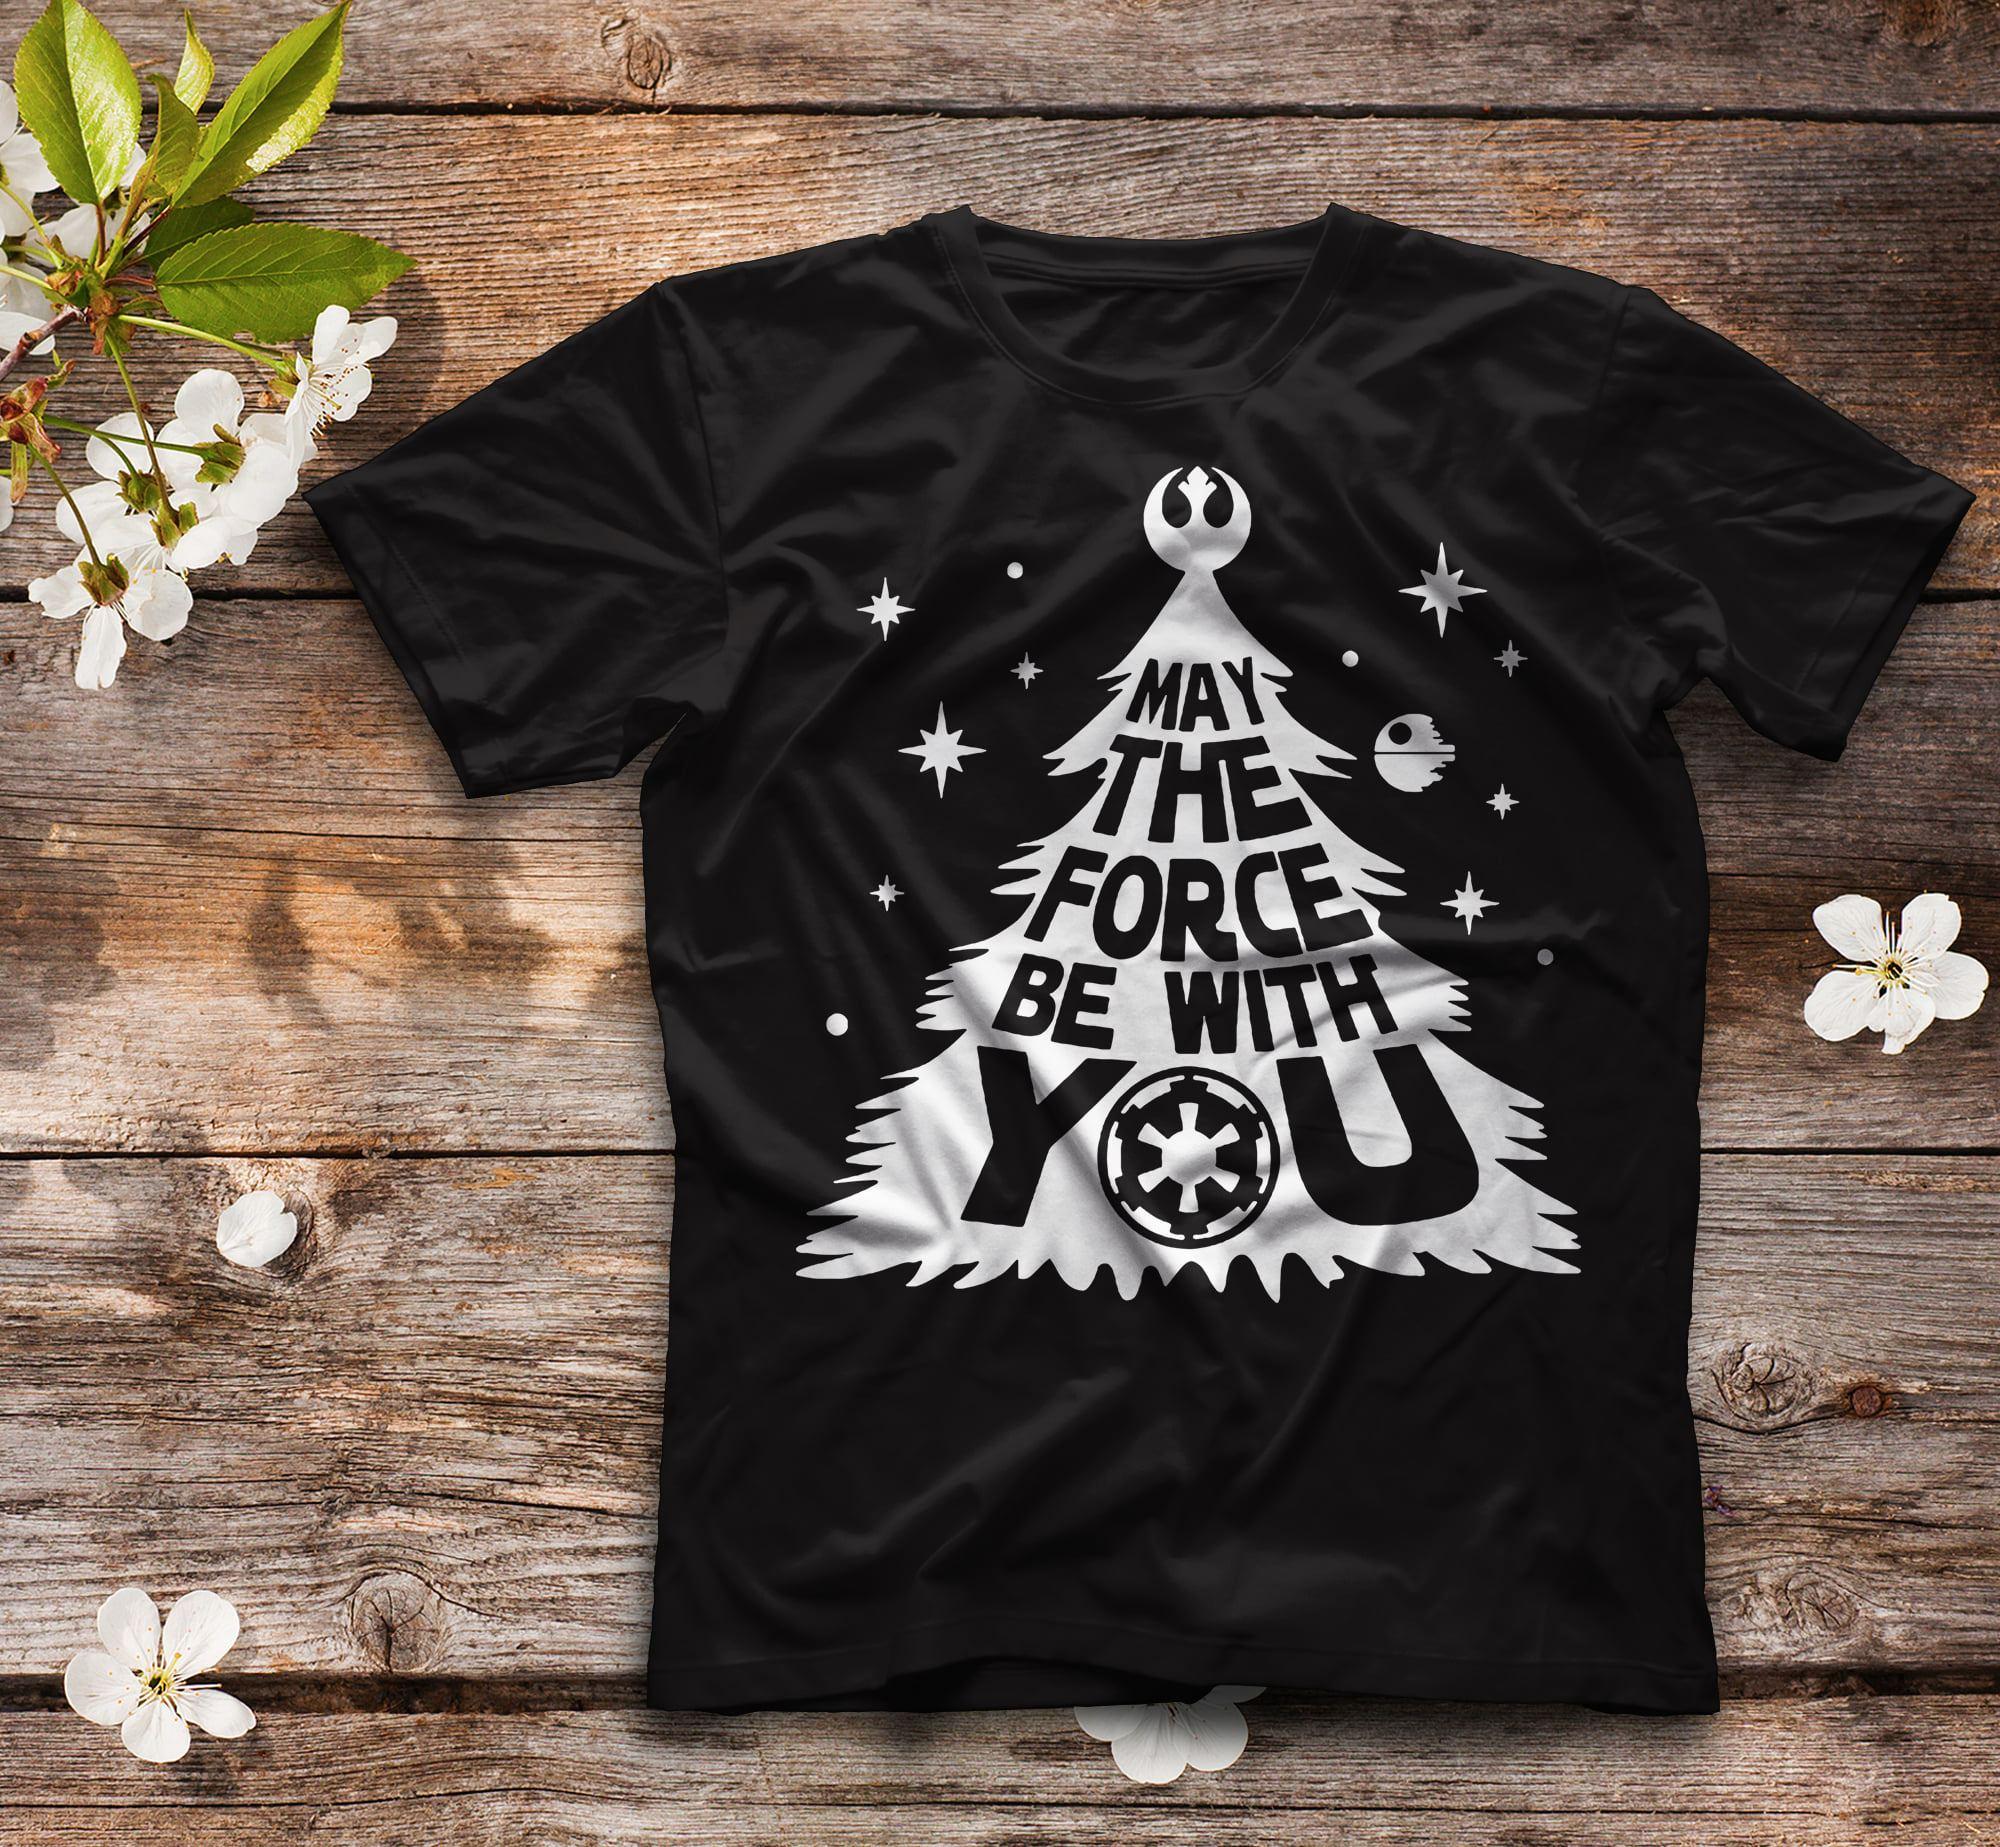 Christmas Tree Shirt - May the force be with you